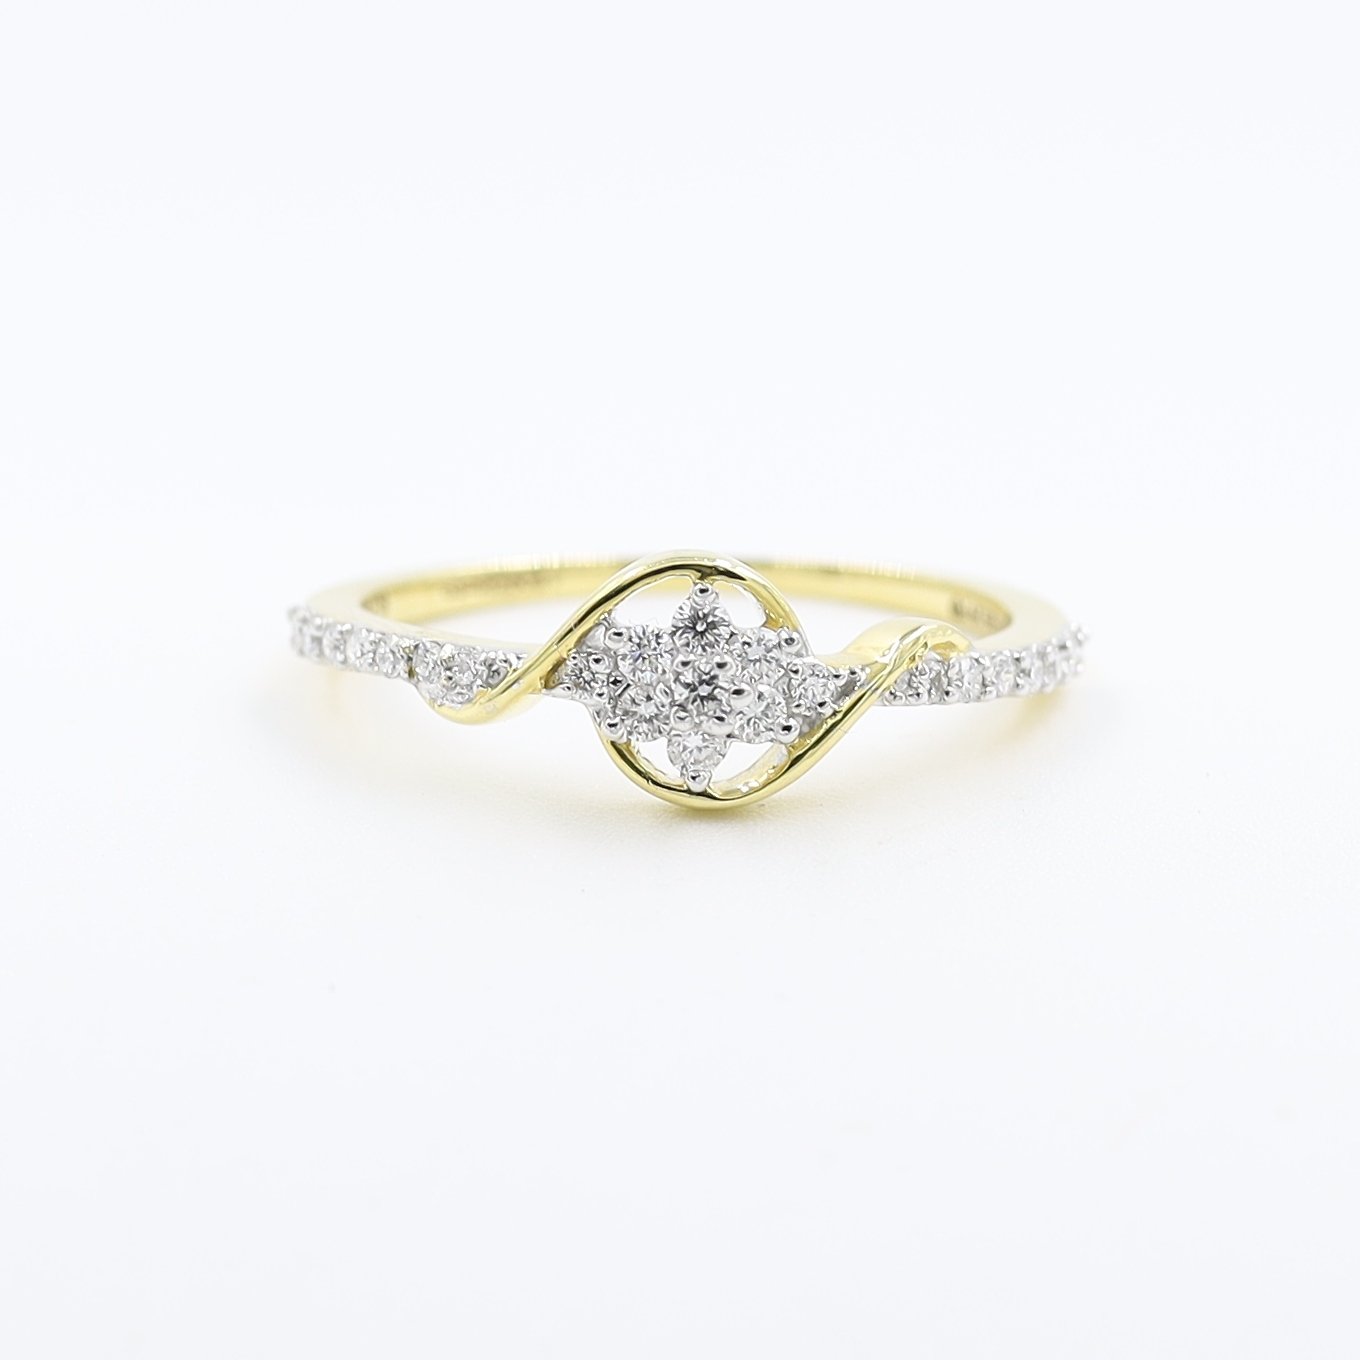 14Kt Yellow Gold Contemporary Line Diamond Ring